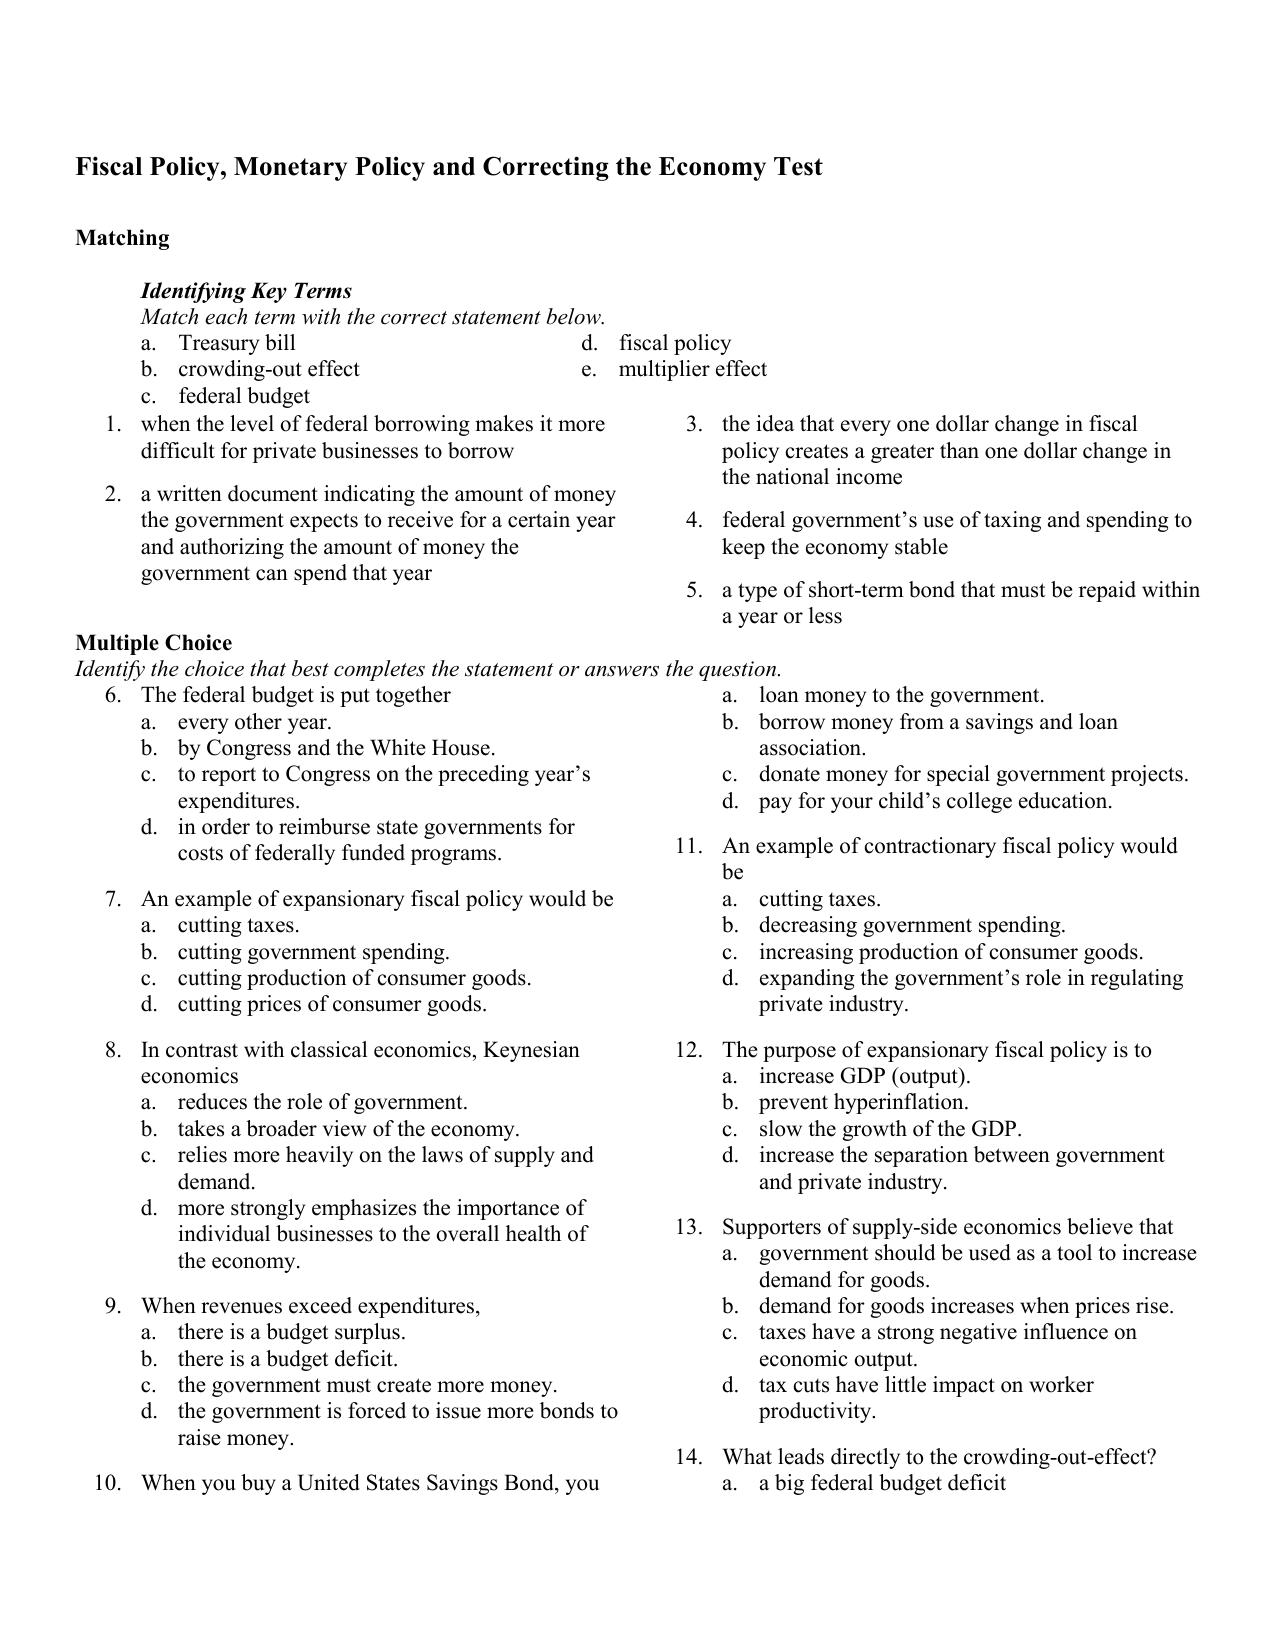 Fiscal Monetary and the Fed Policy With Monetary Policy Worksheet Answers